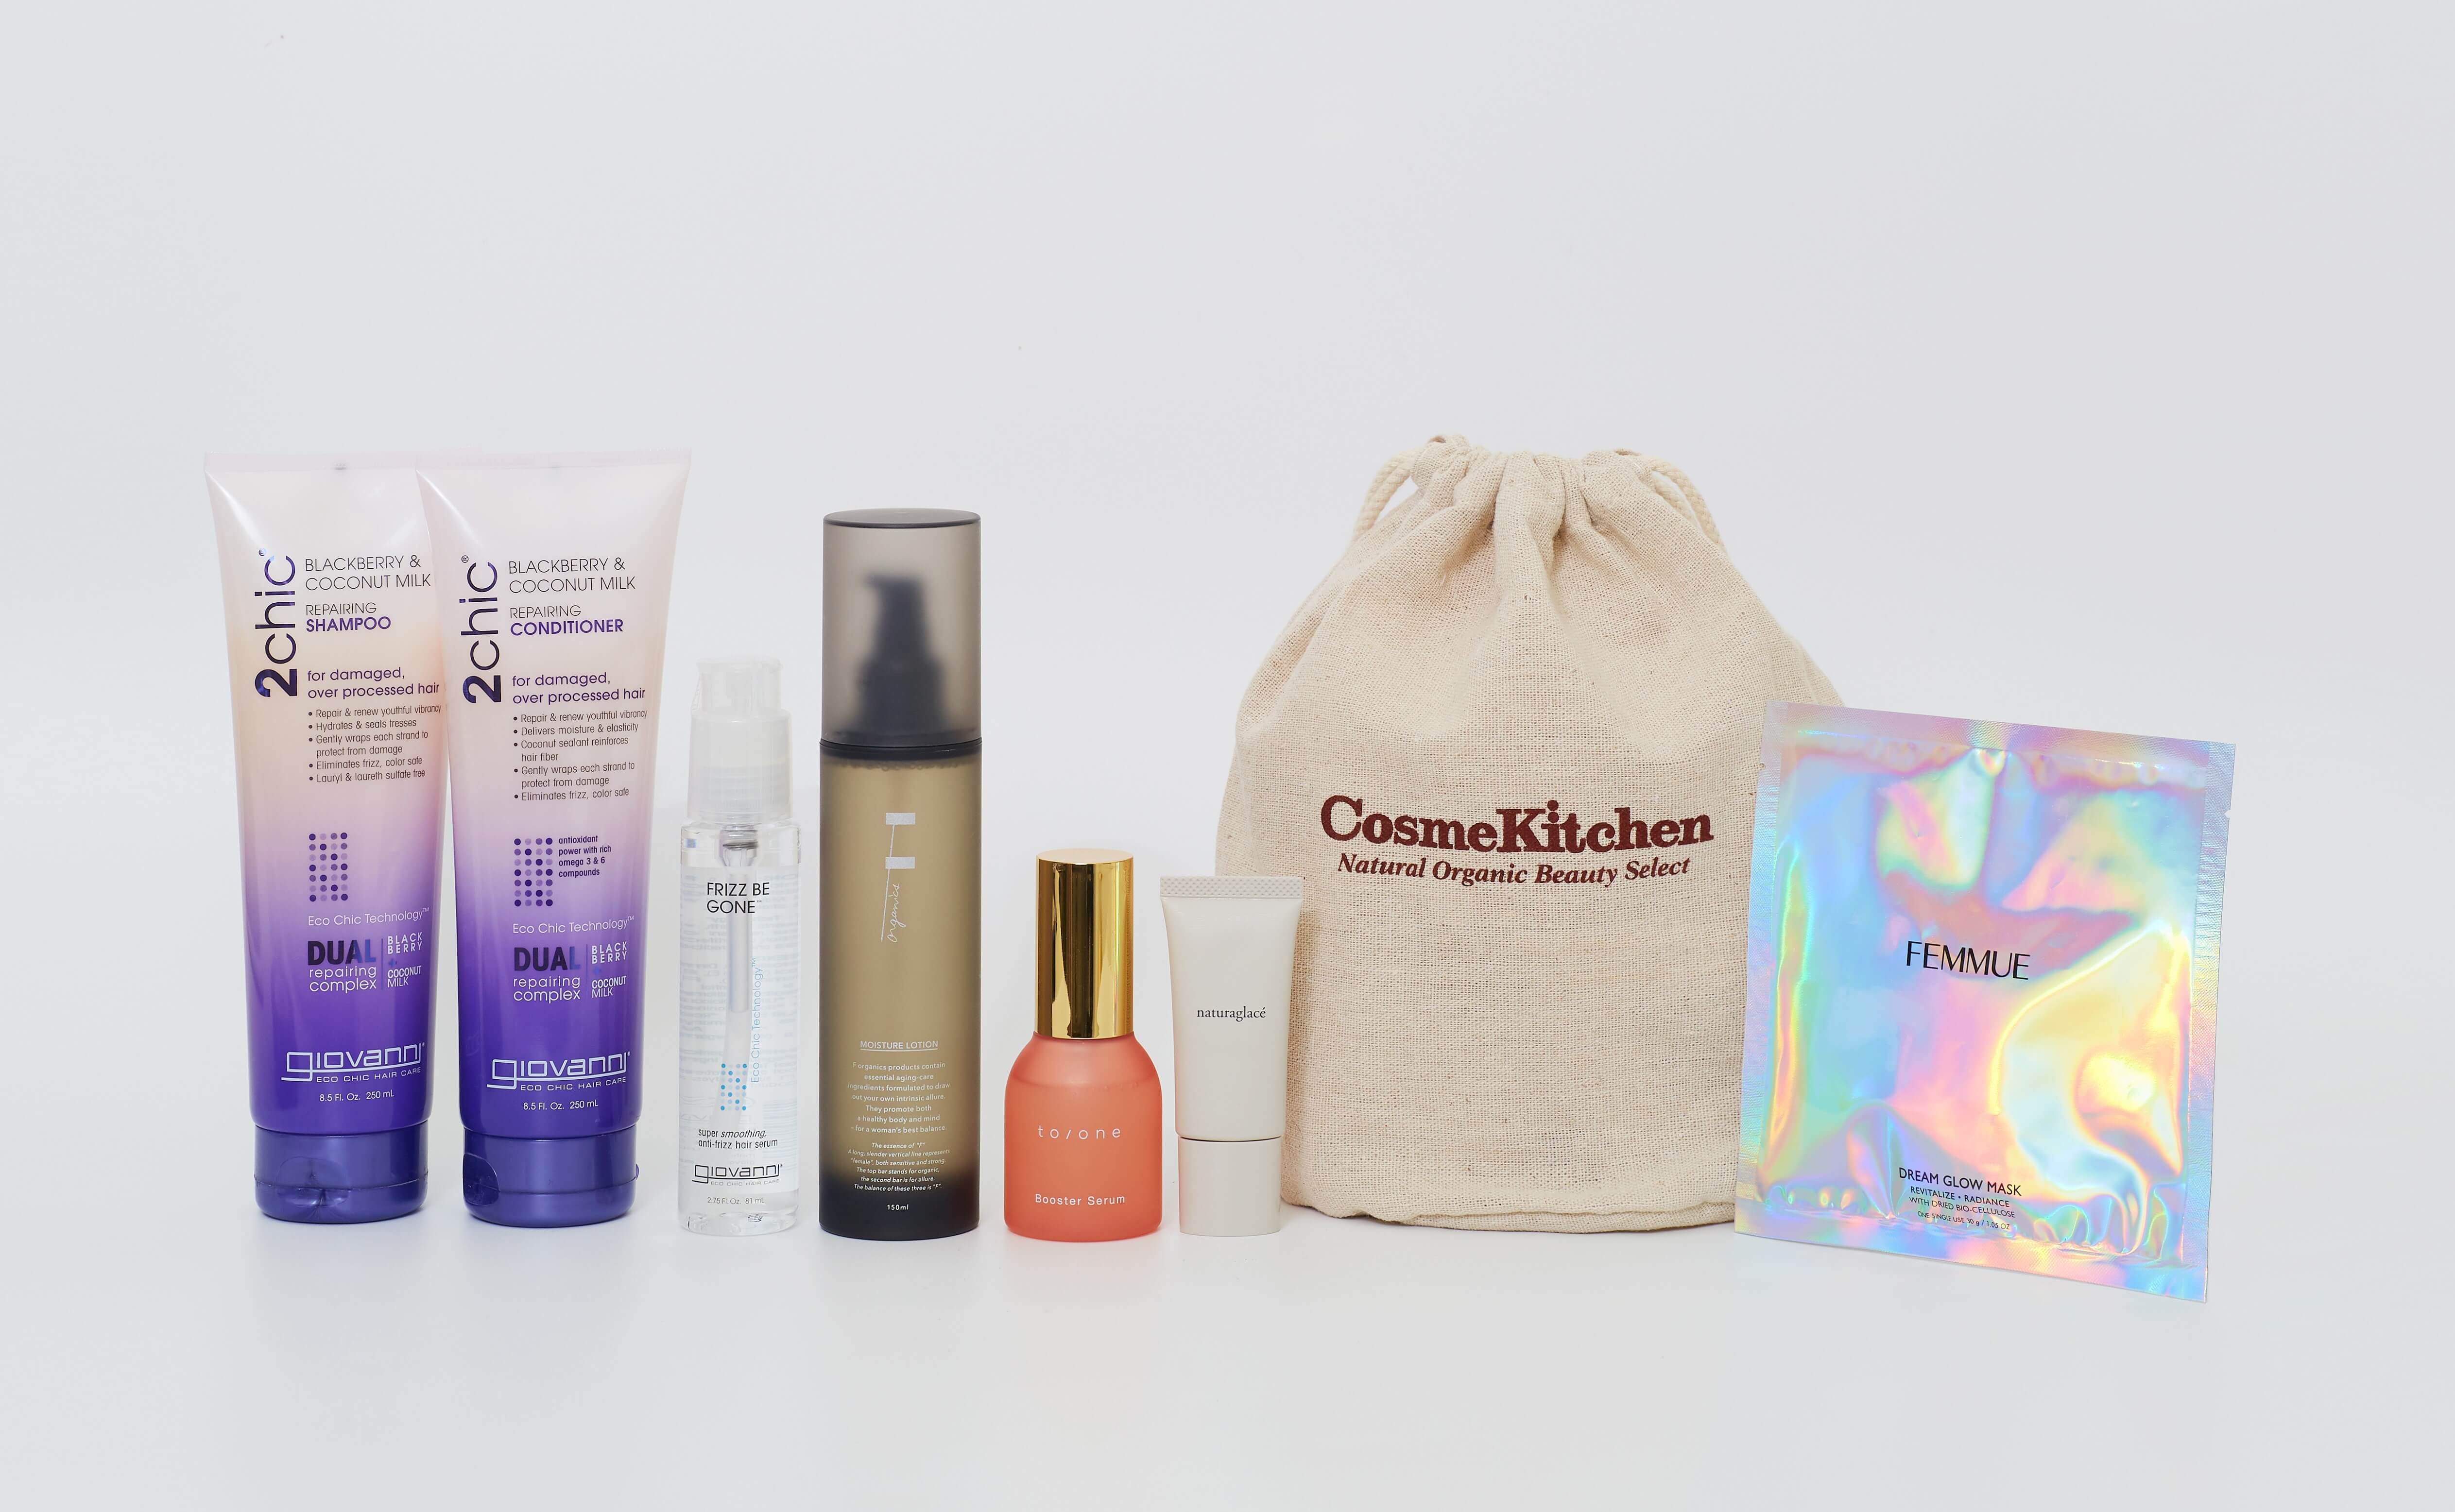 Cosme Kitchen 2020 Lucky Bag